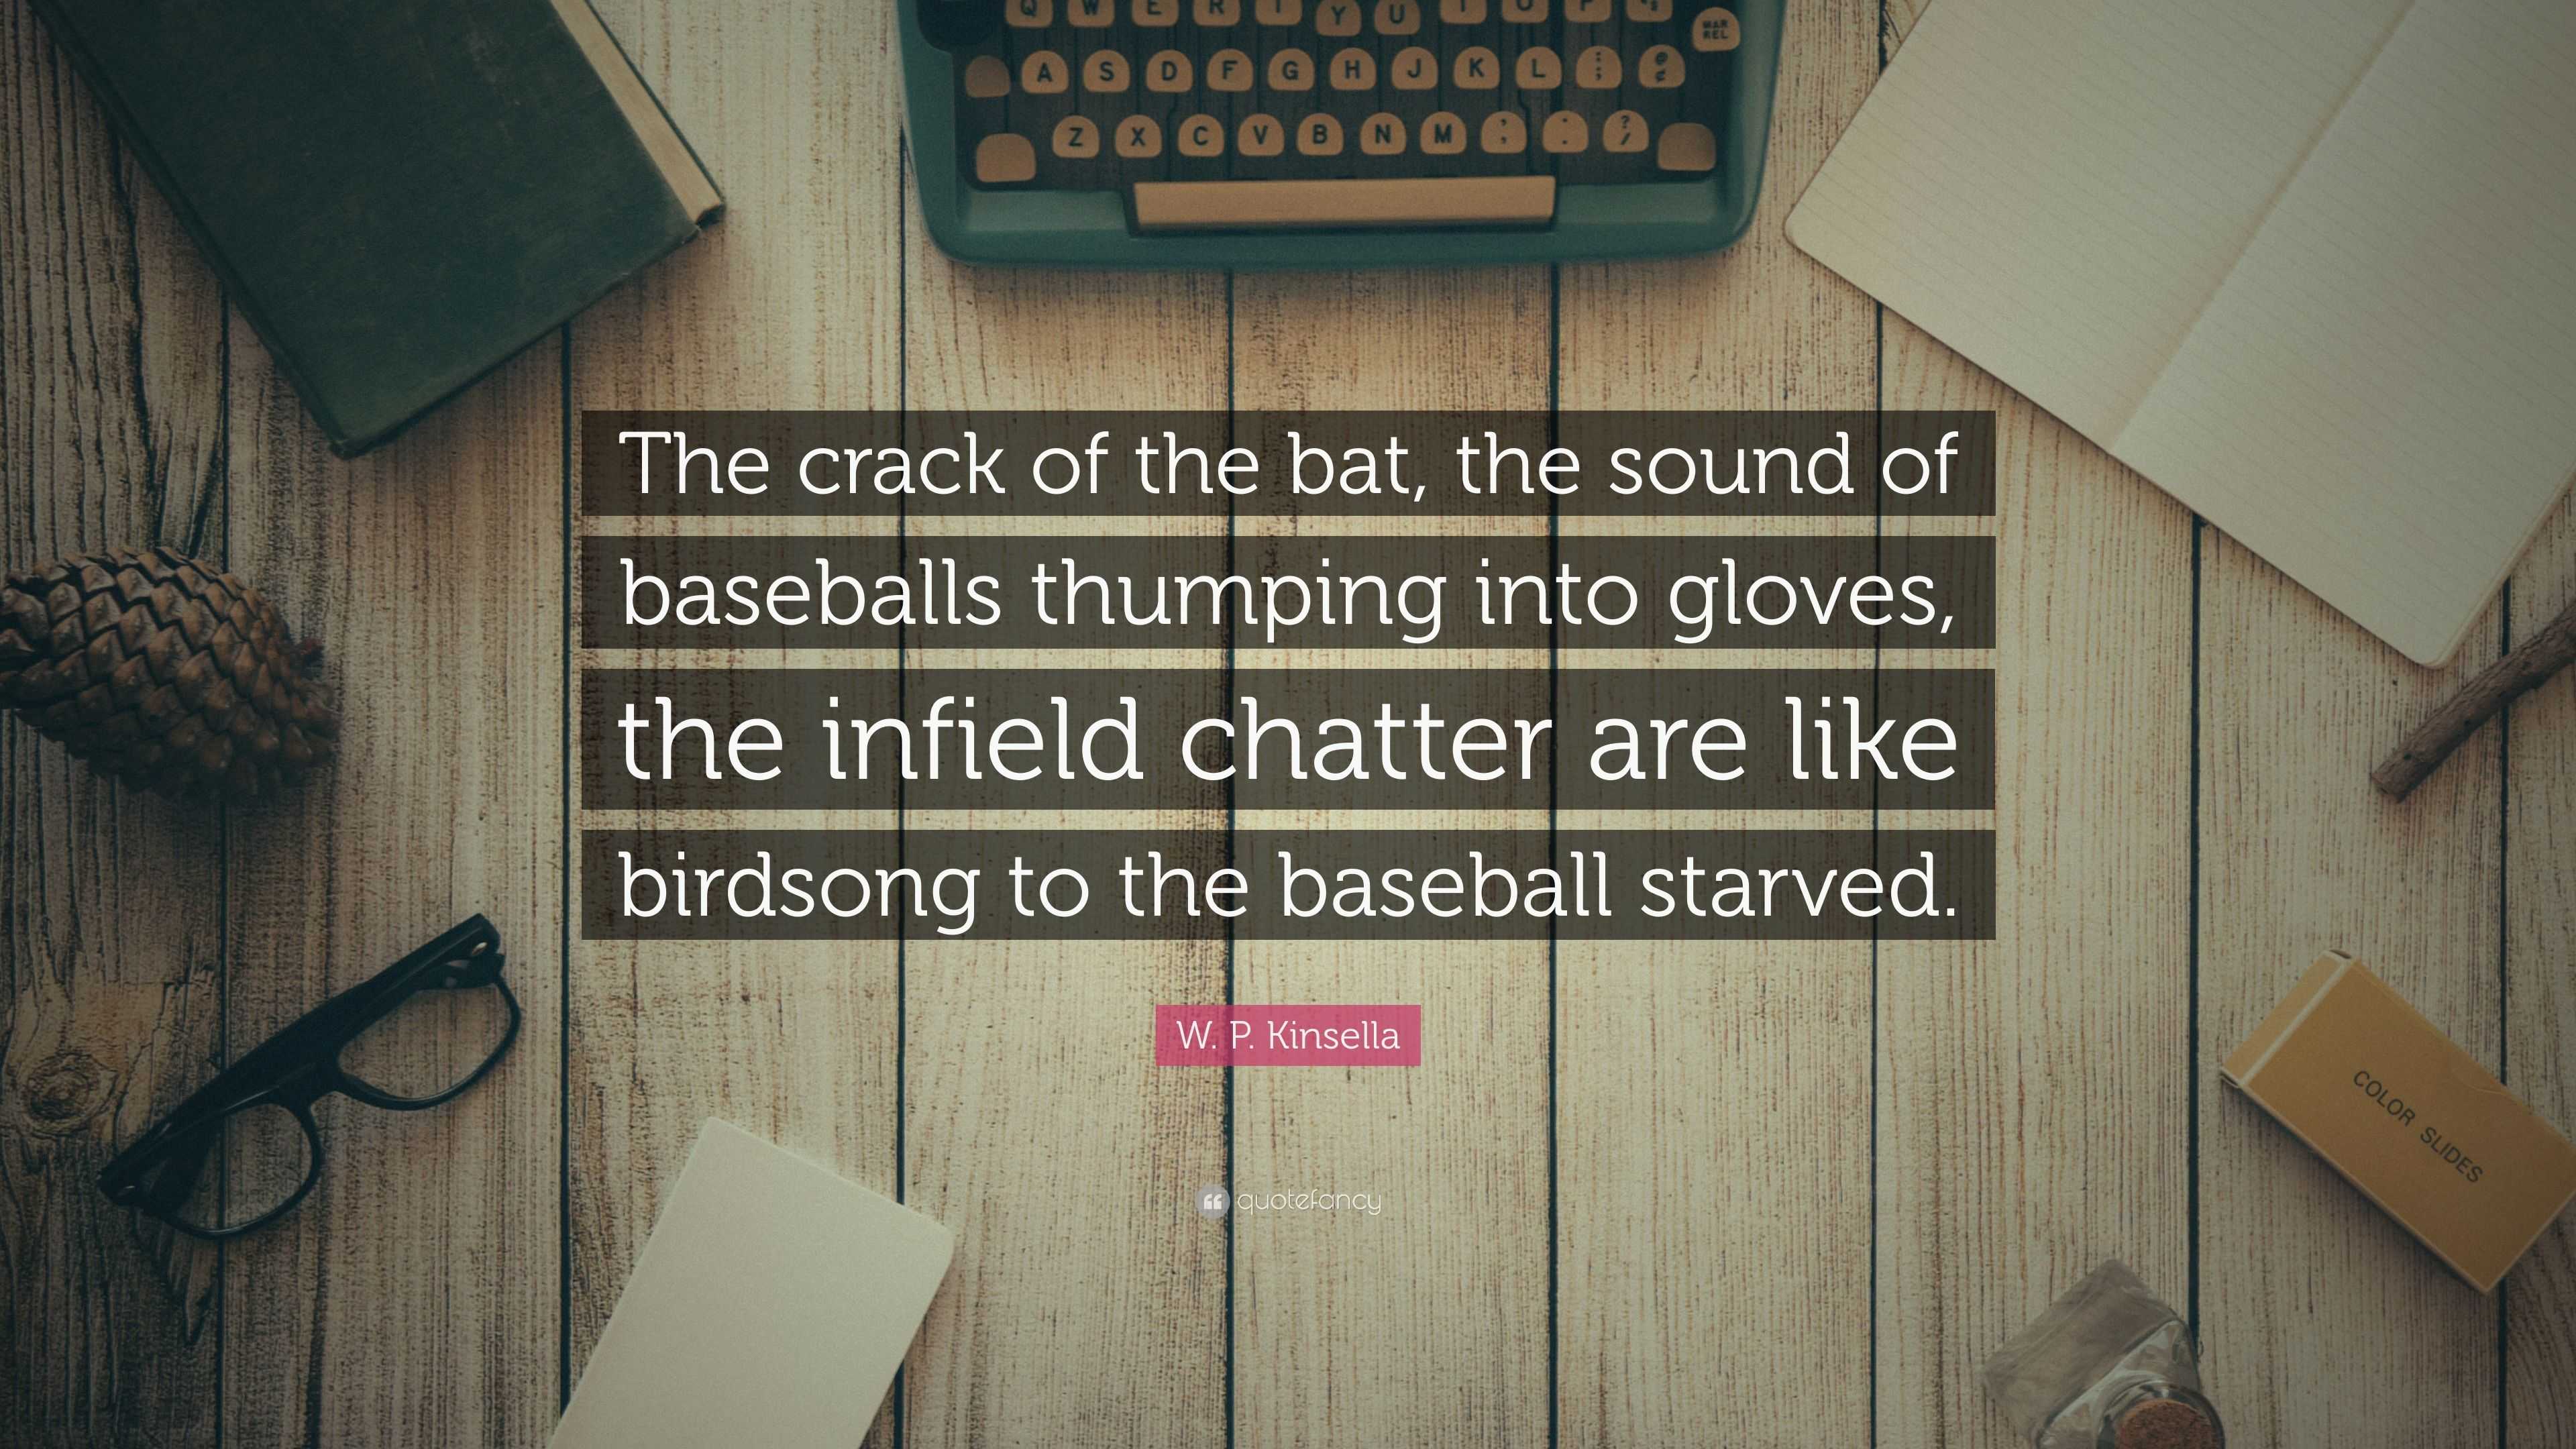 Infield Chatter